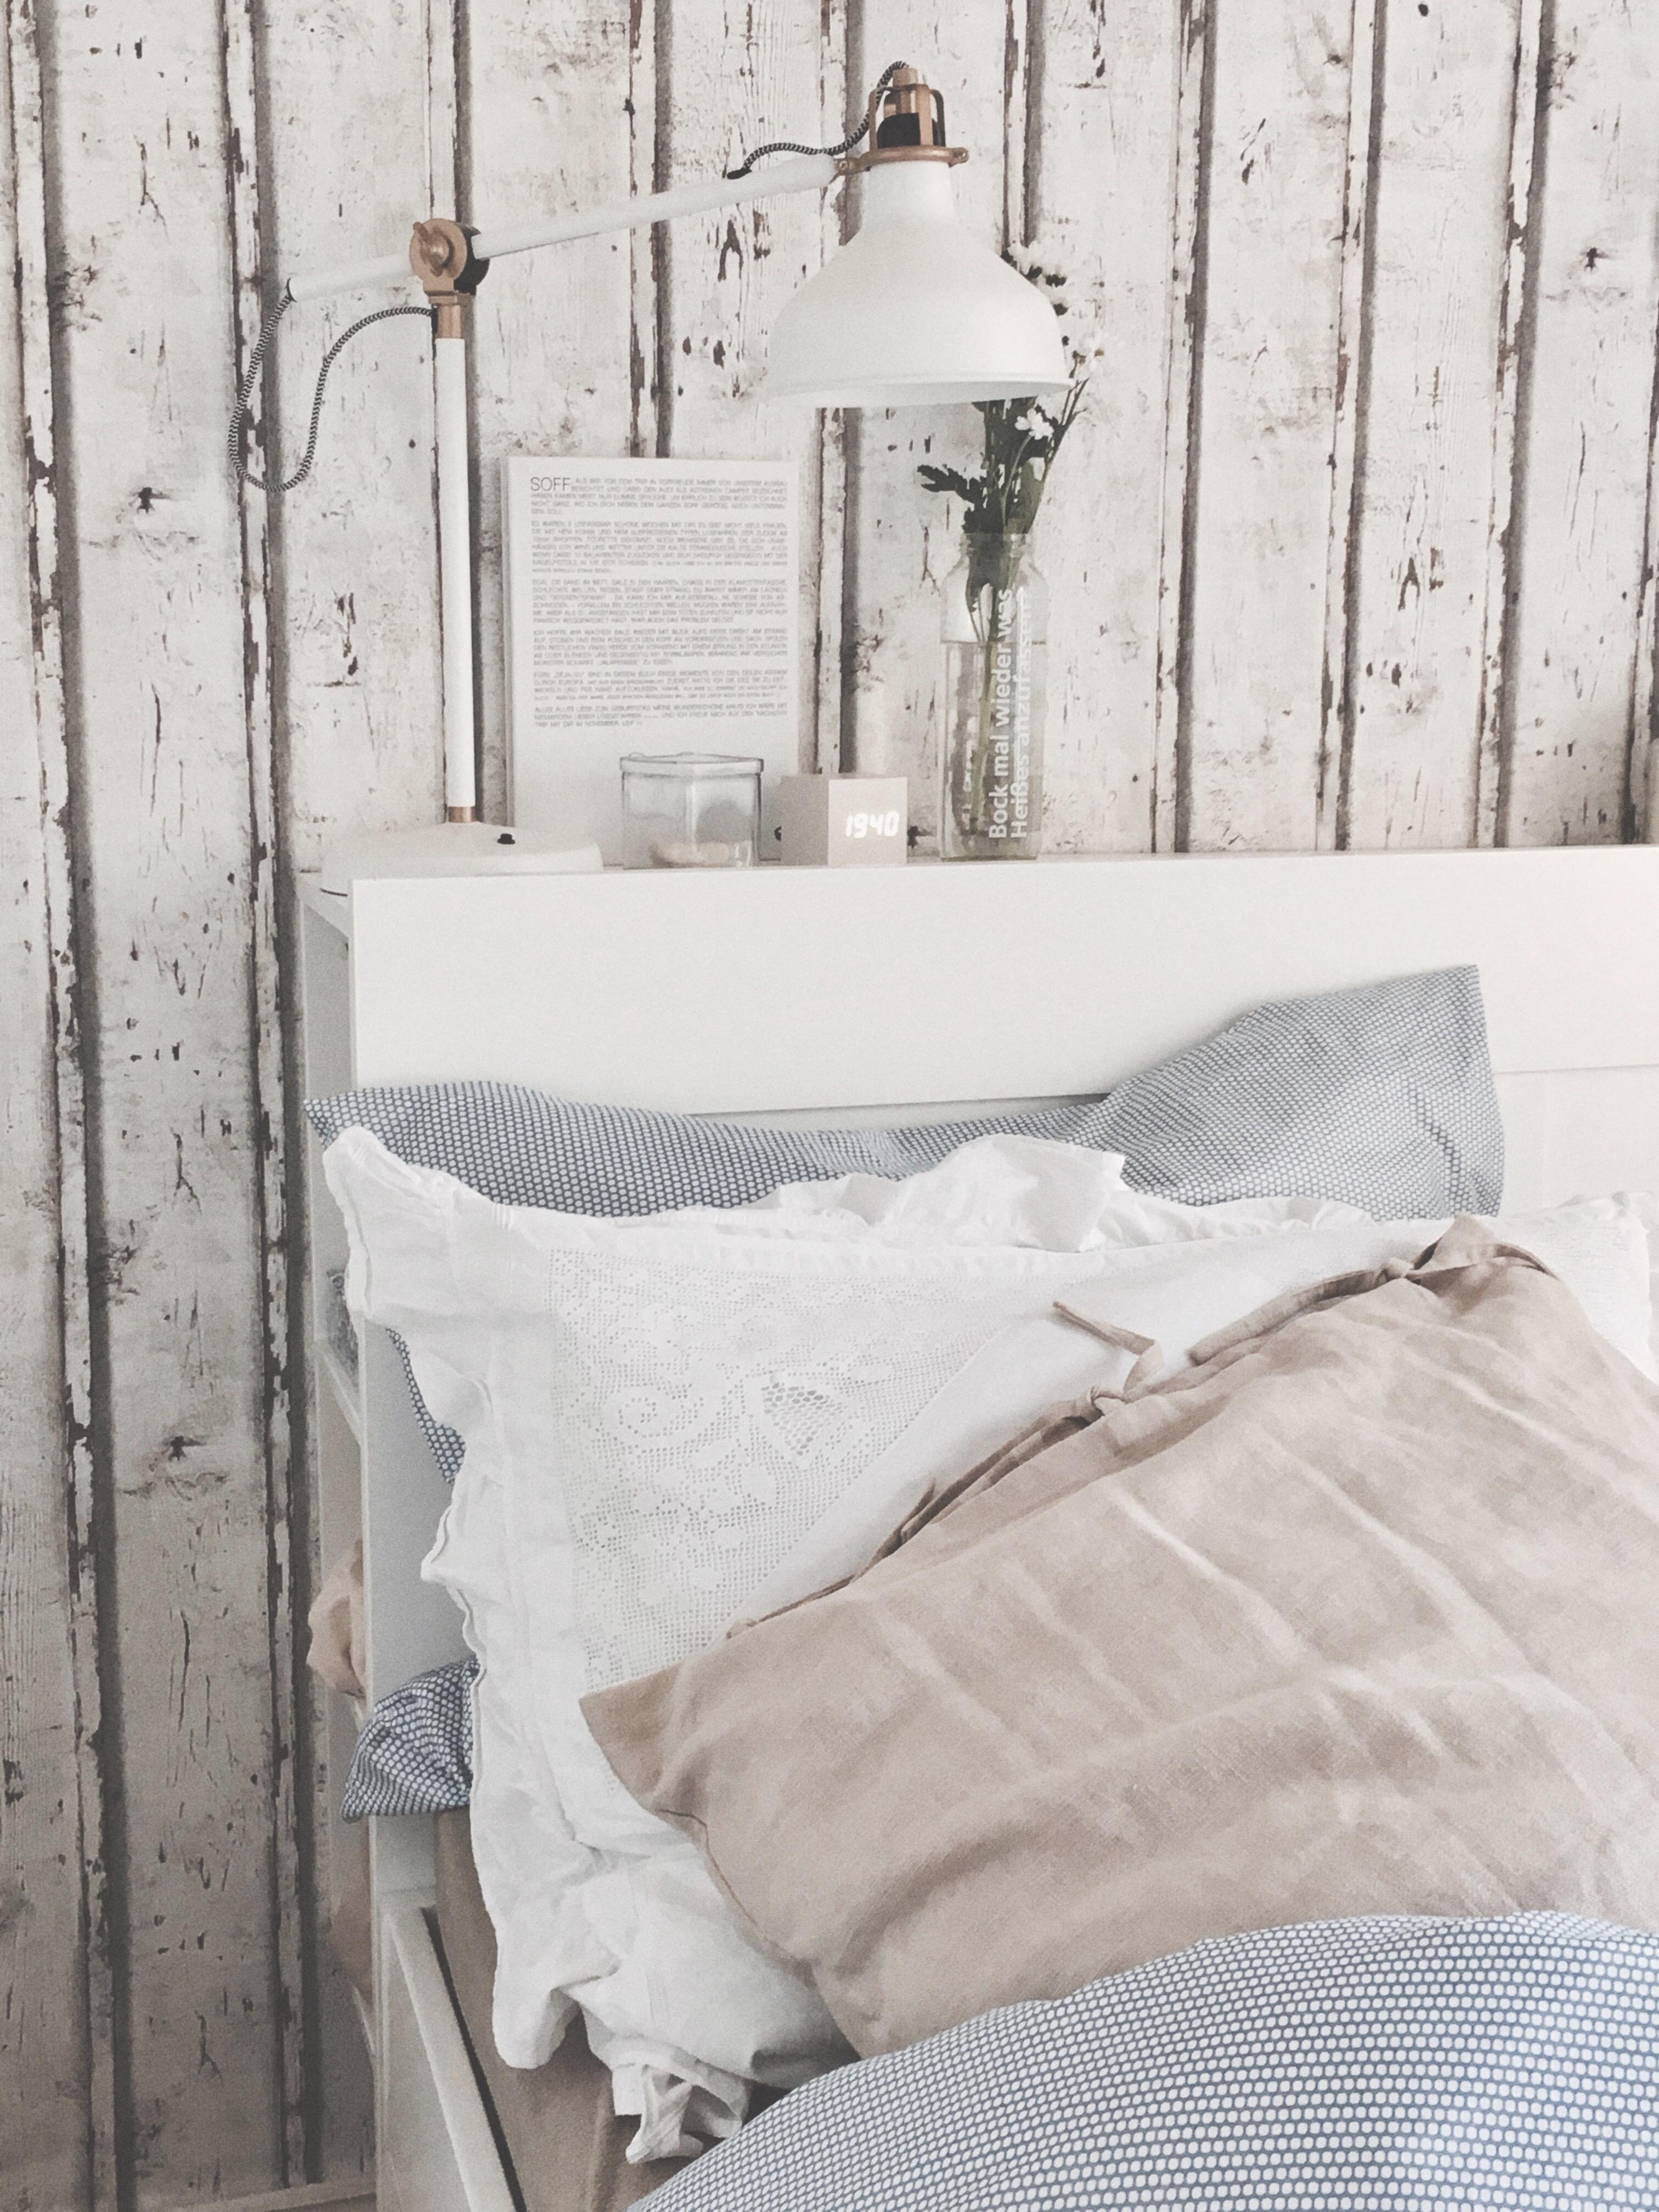 Sweet dreams 💭
#bedroom #couchstyle #home #interior 